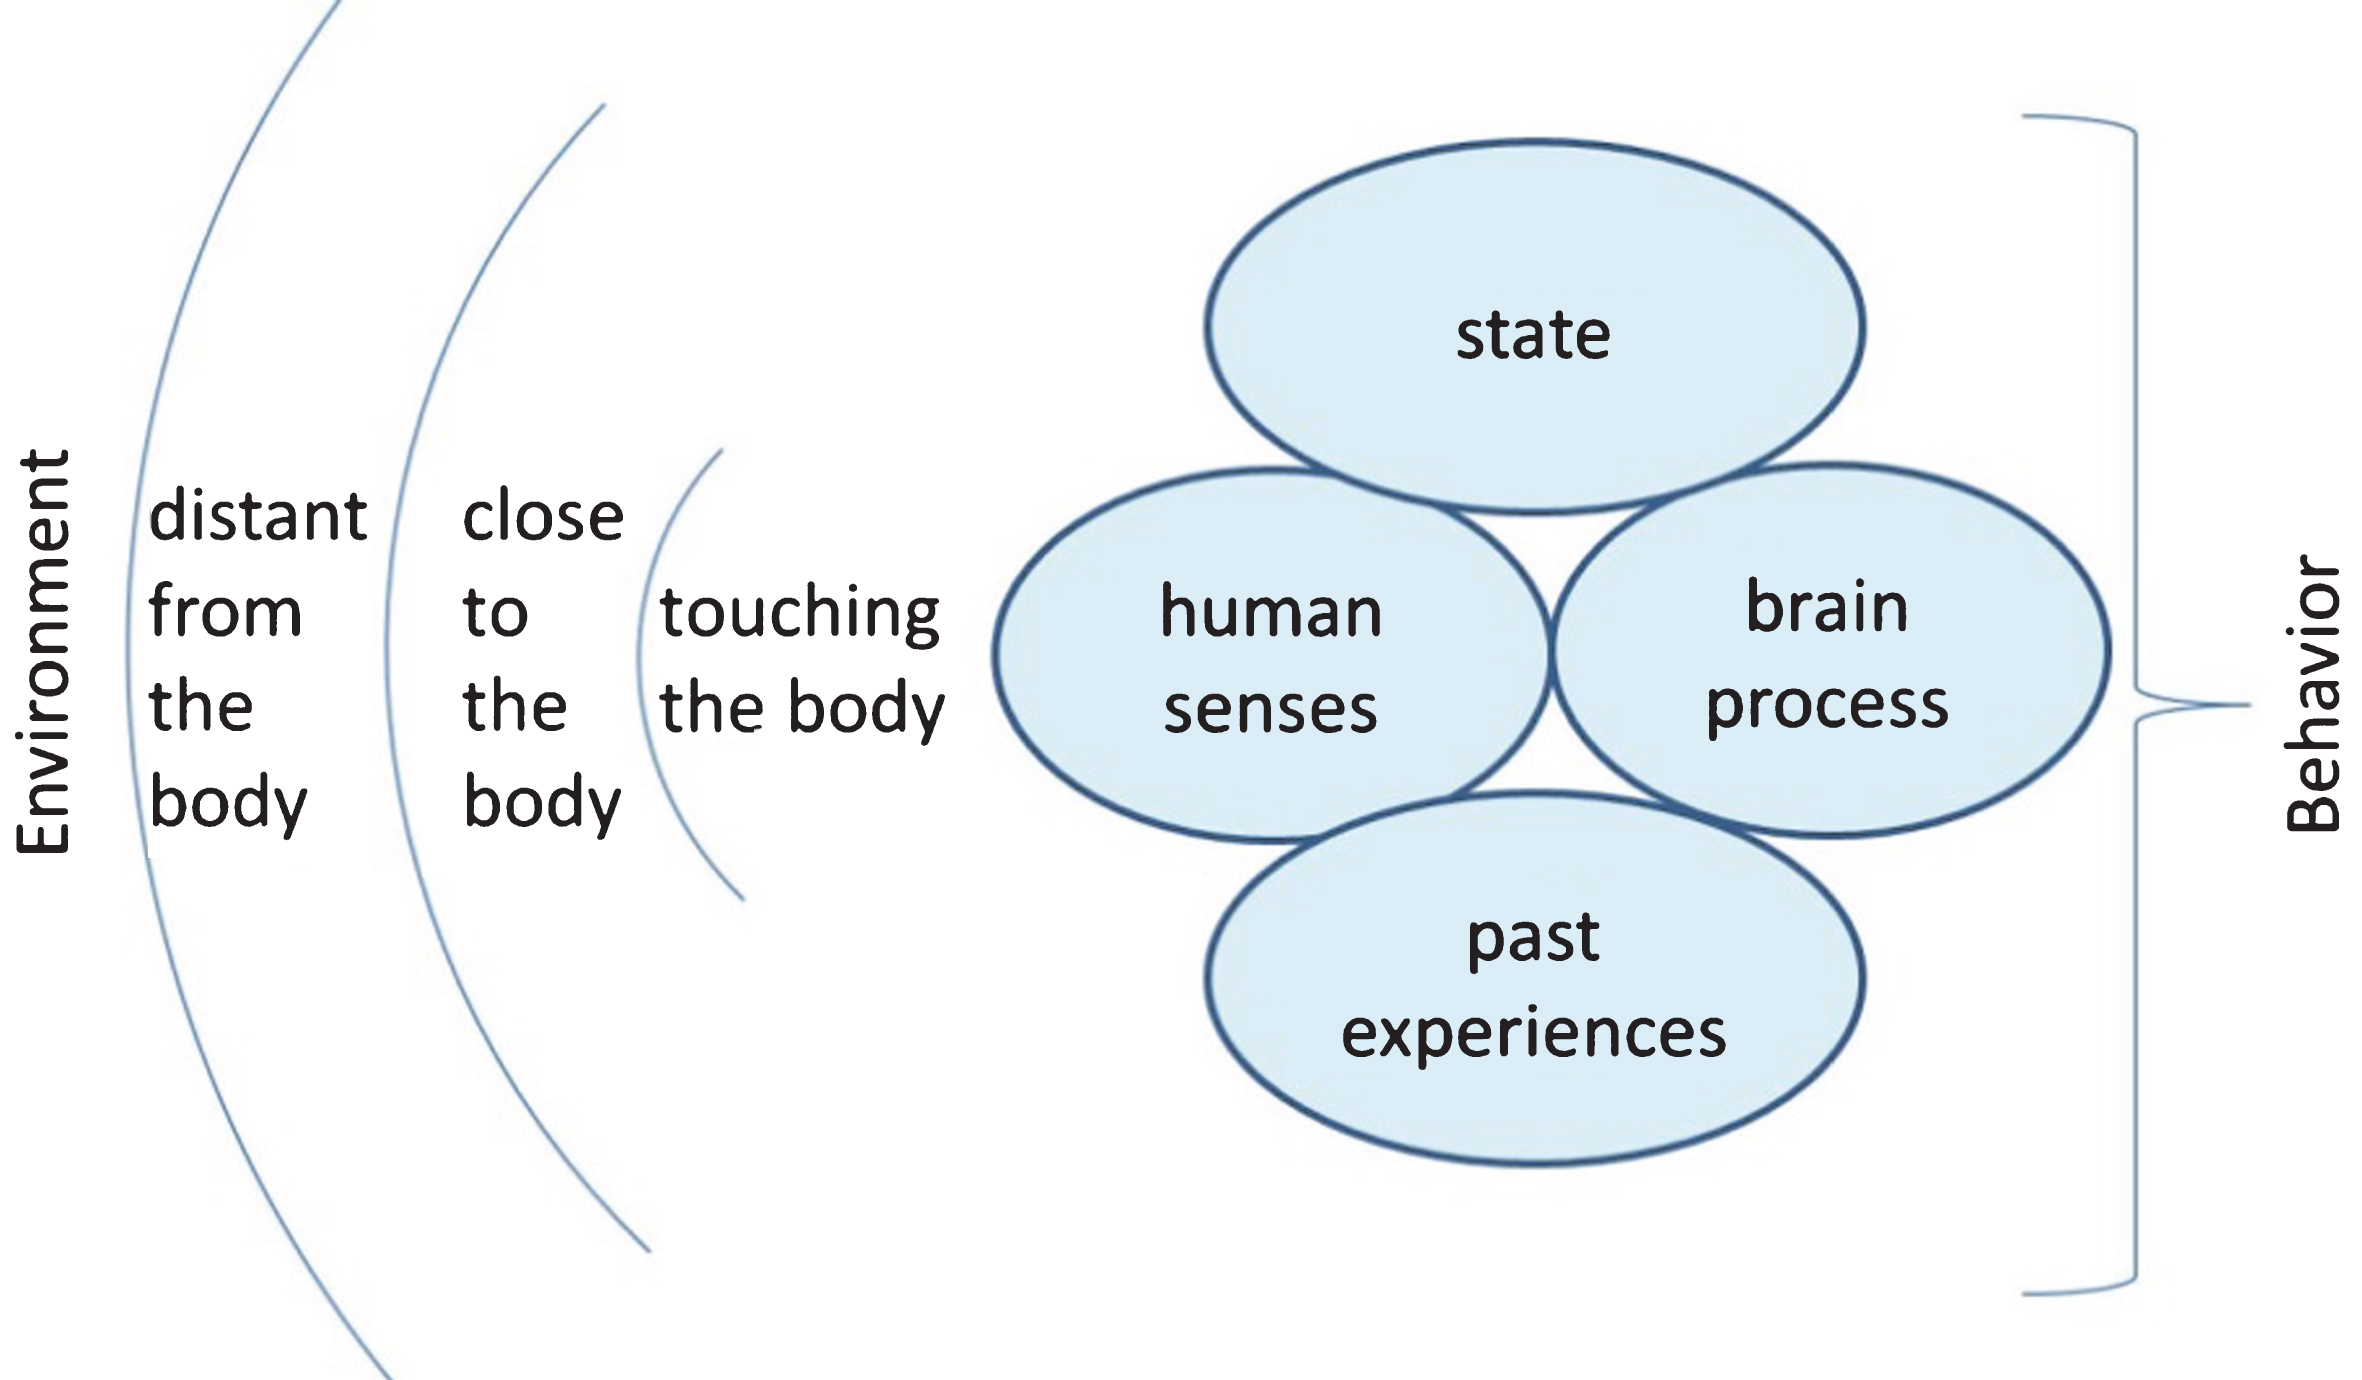 This schema shows the relationship between the environment and behavior.